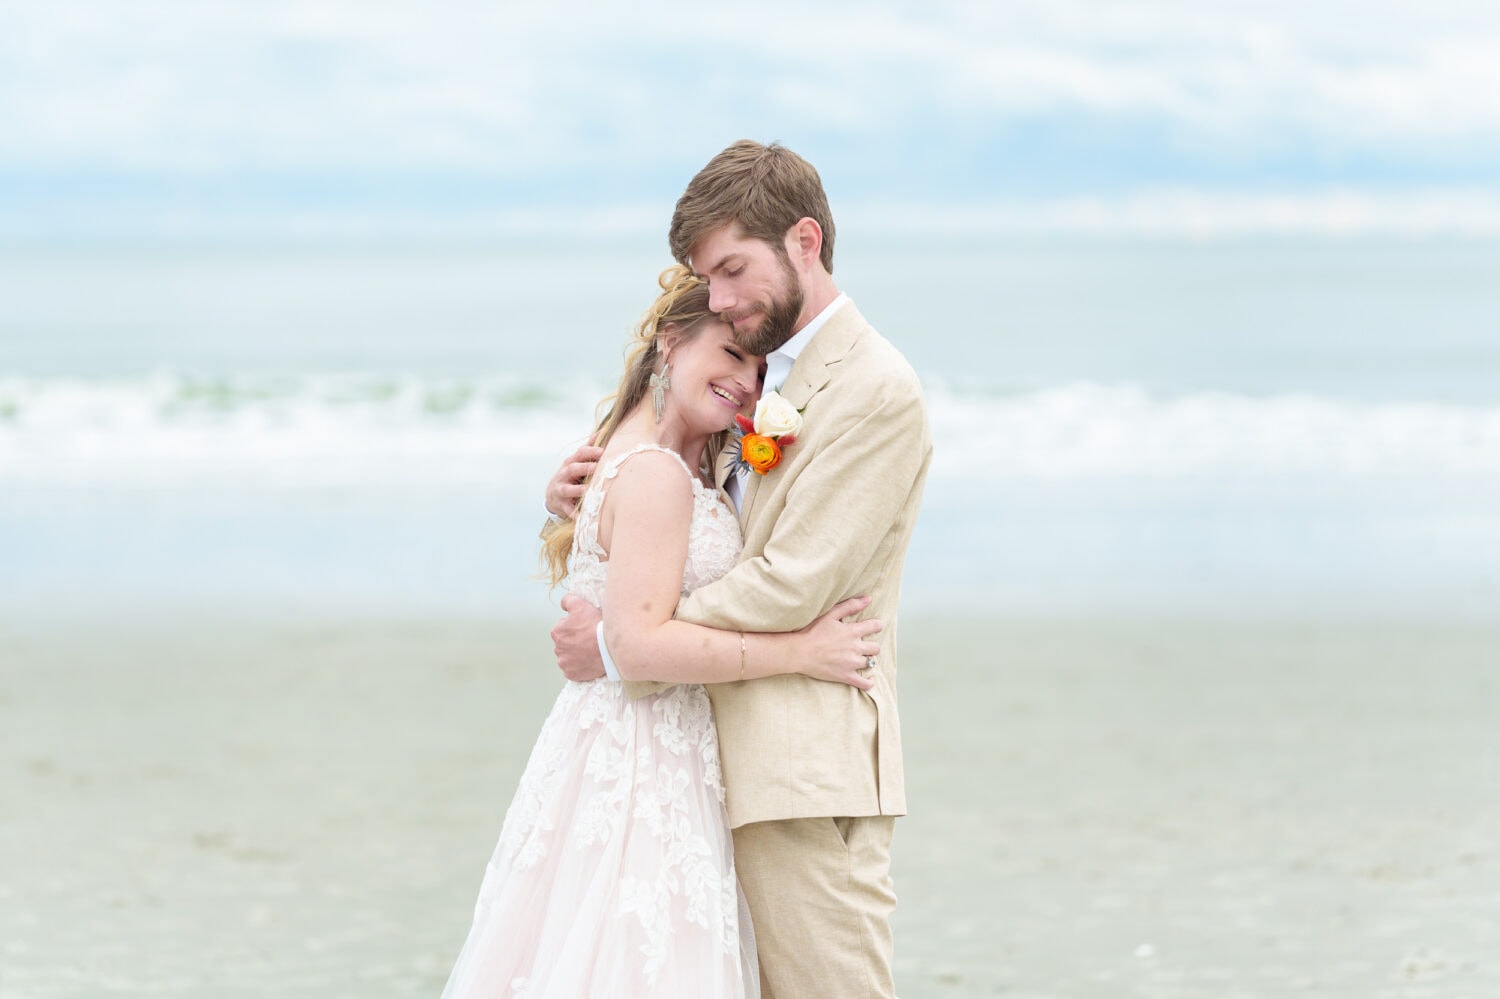 Hug on the beach with bride and groom - 21 Main Events - North Myrtle Beach